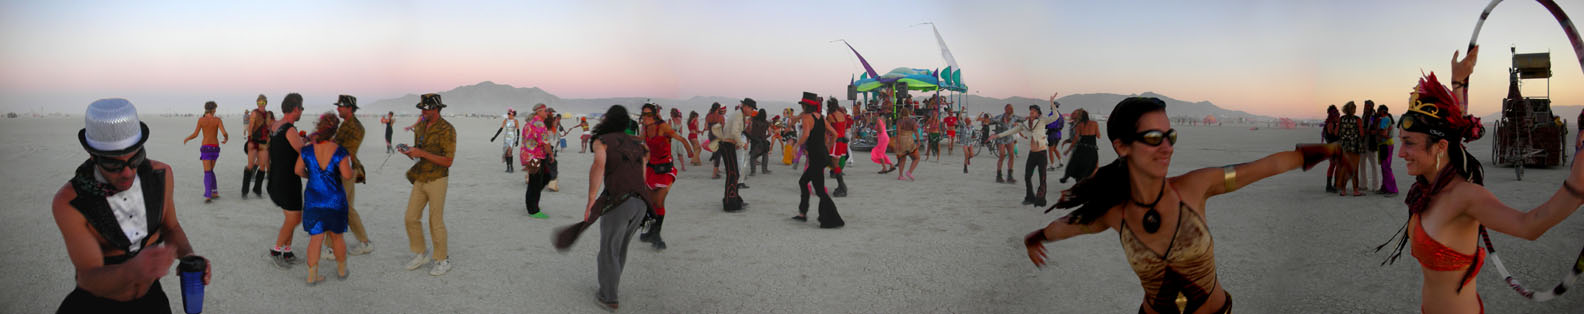 Otter Clan Dance on the Playa